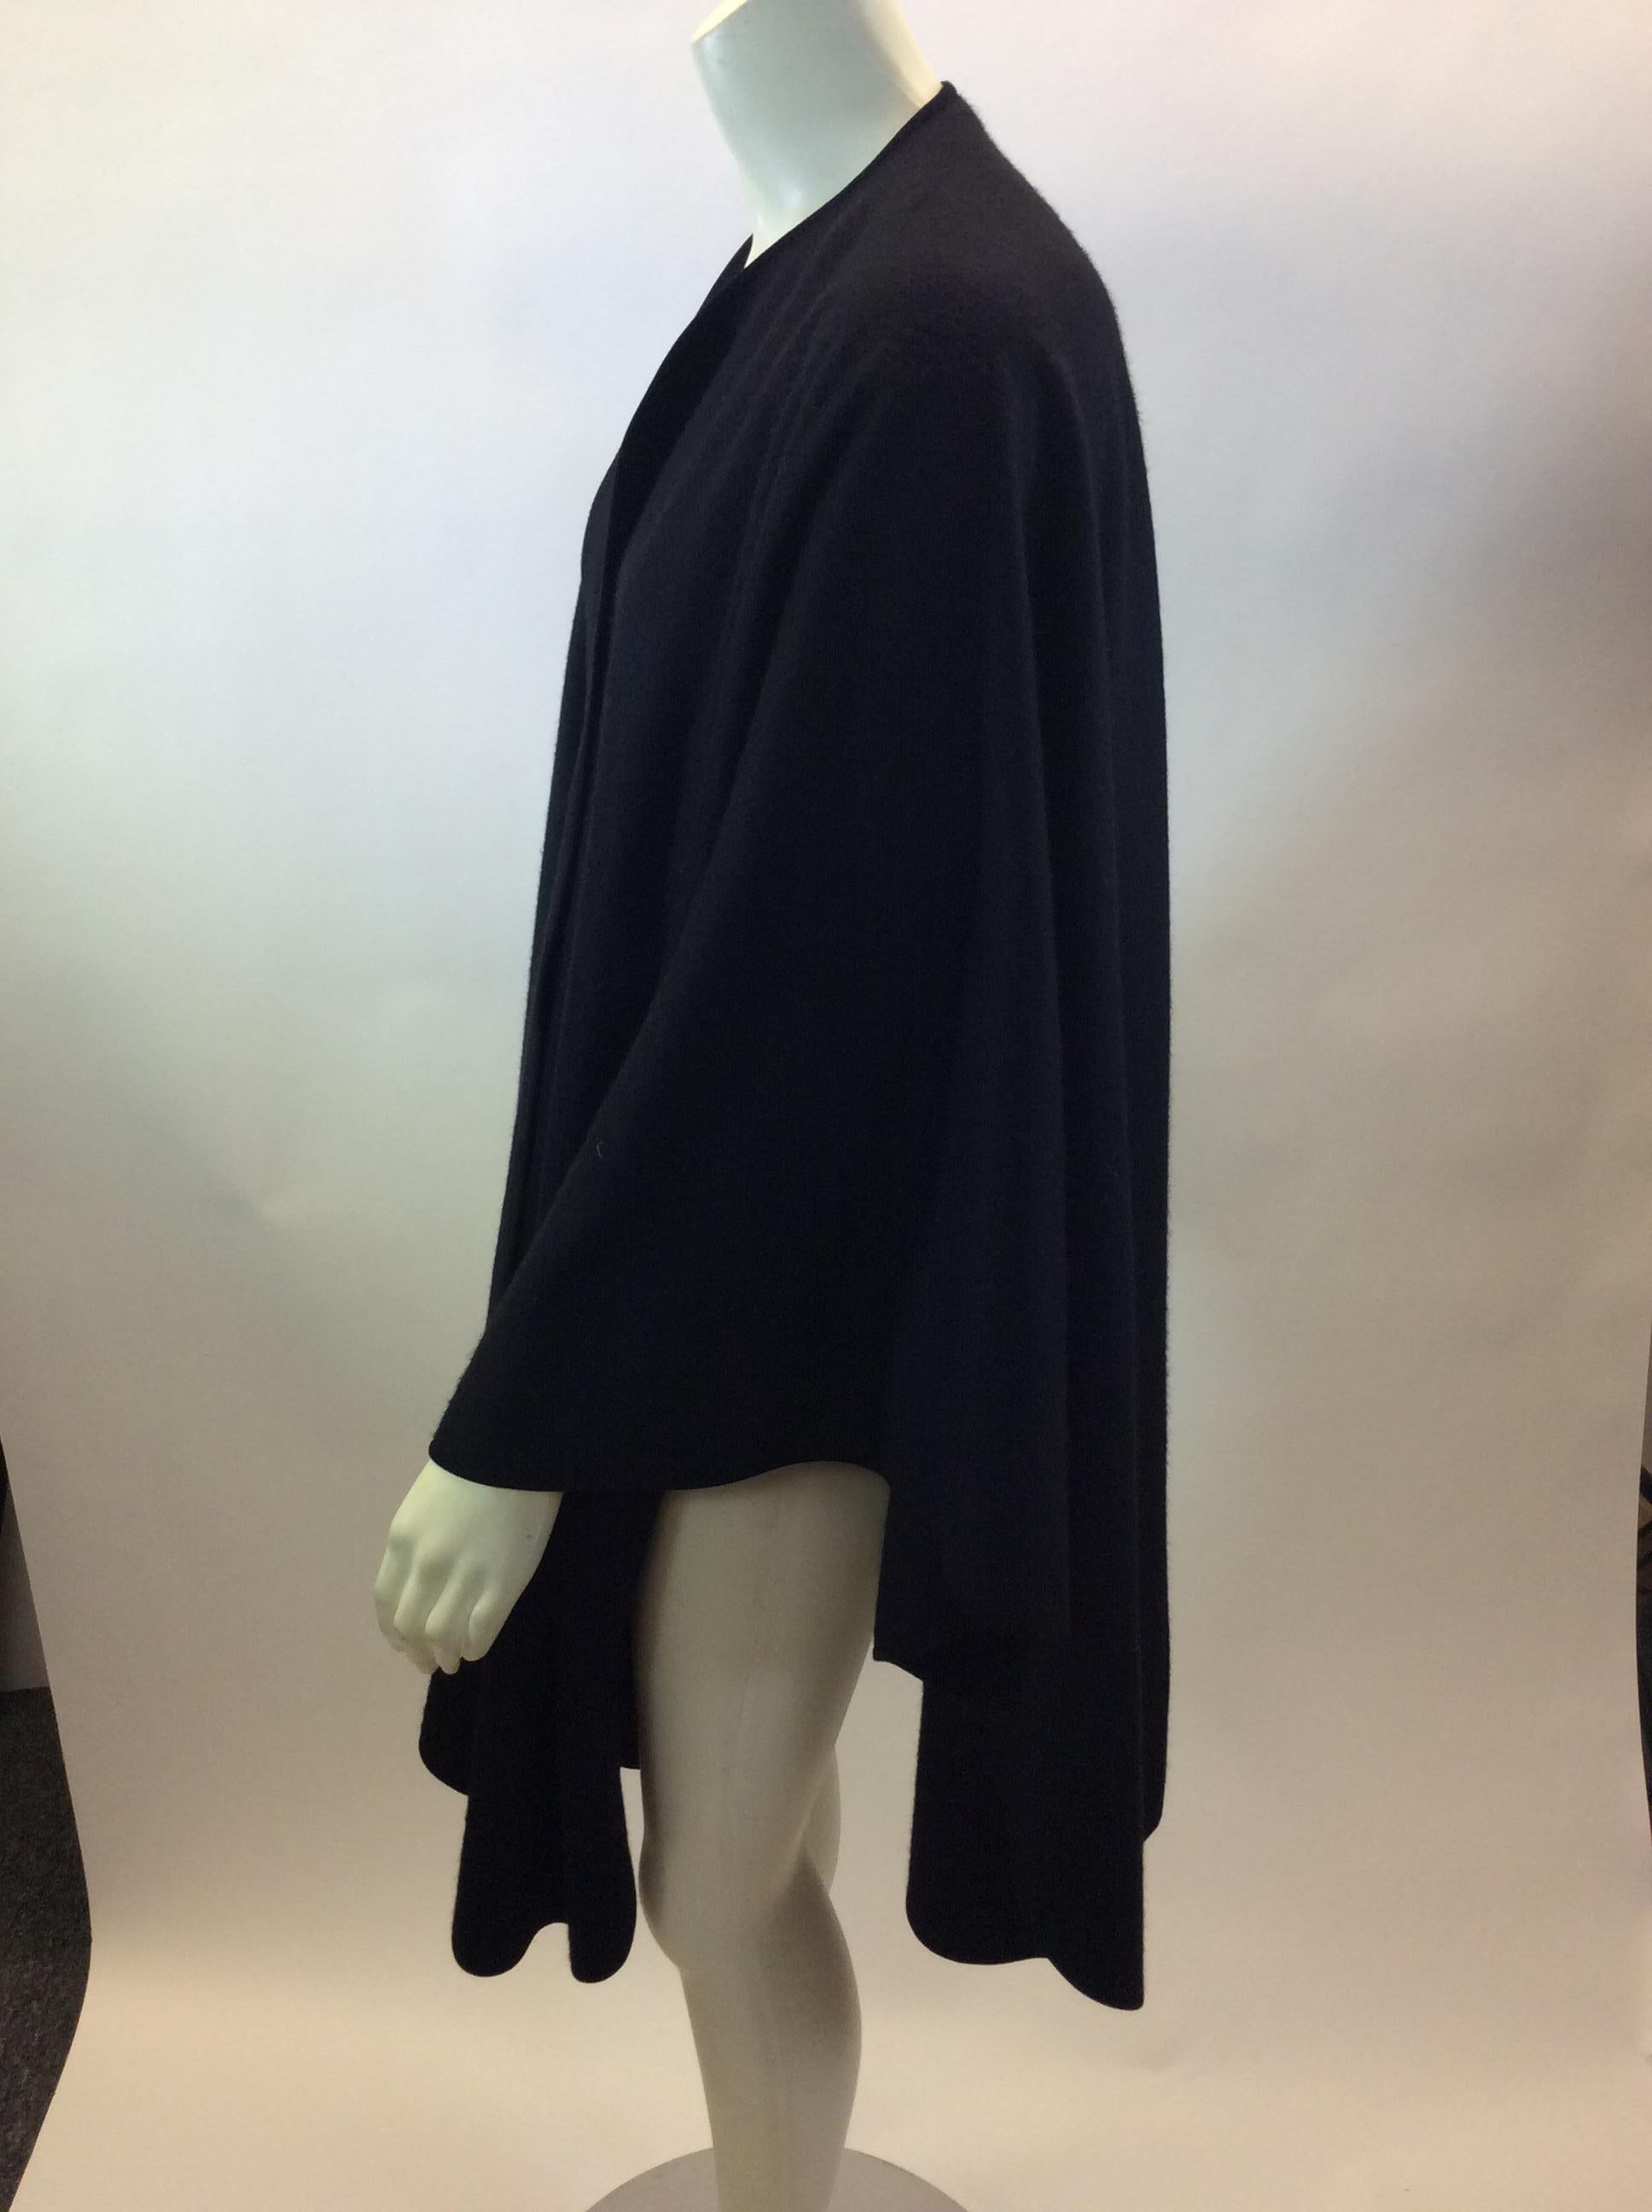 Loro Paina Black Cashmere Shawl
$699
Made in Italy
100% Cashmere
Length 38